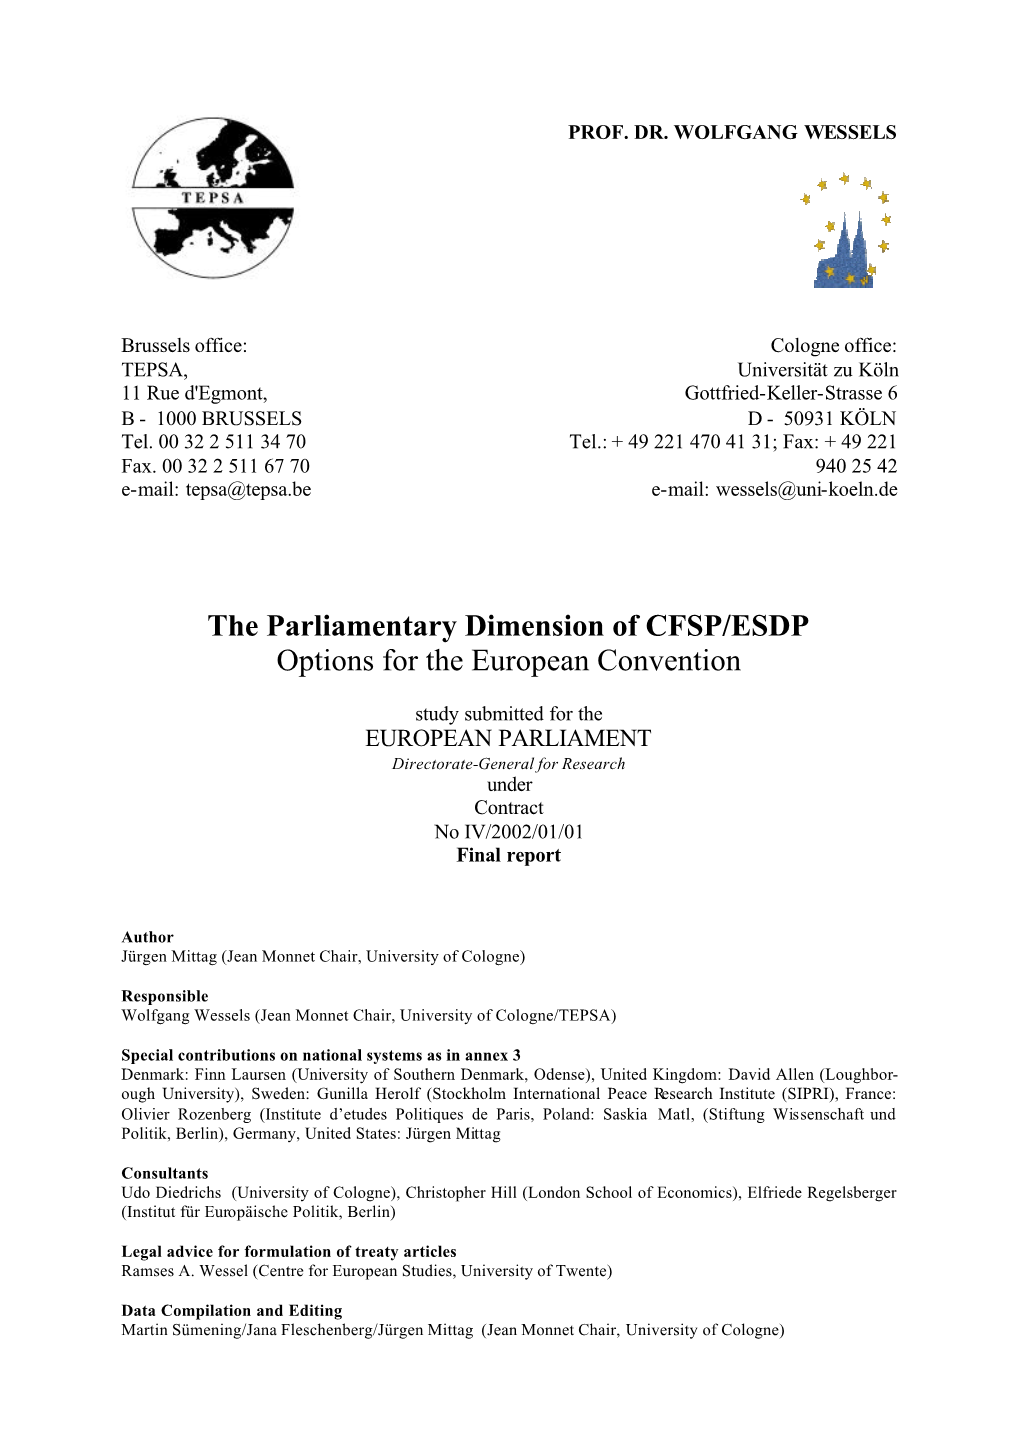 The Parliamentary Dimension of CFSP/ESDP Options for the European Convention